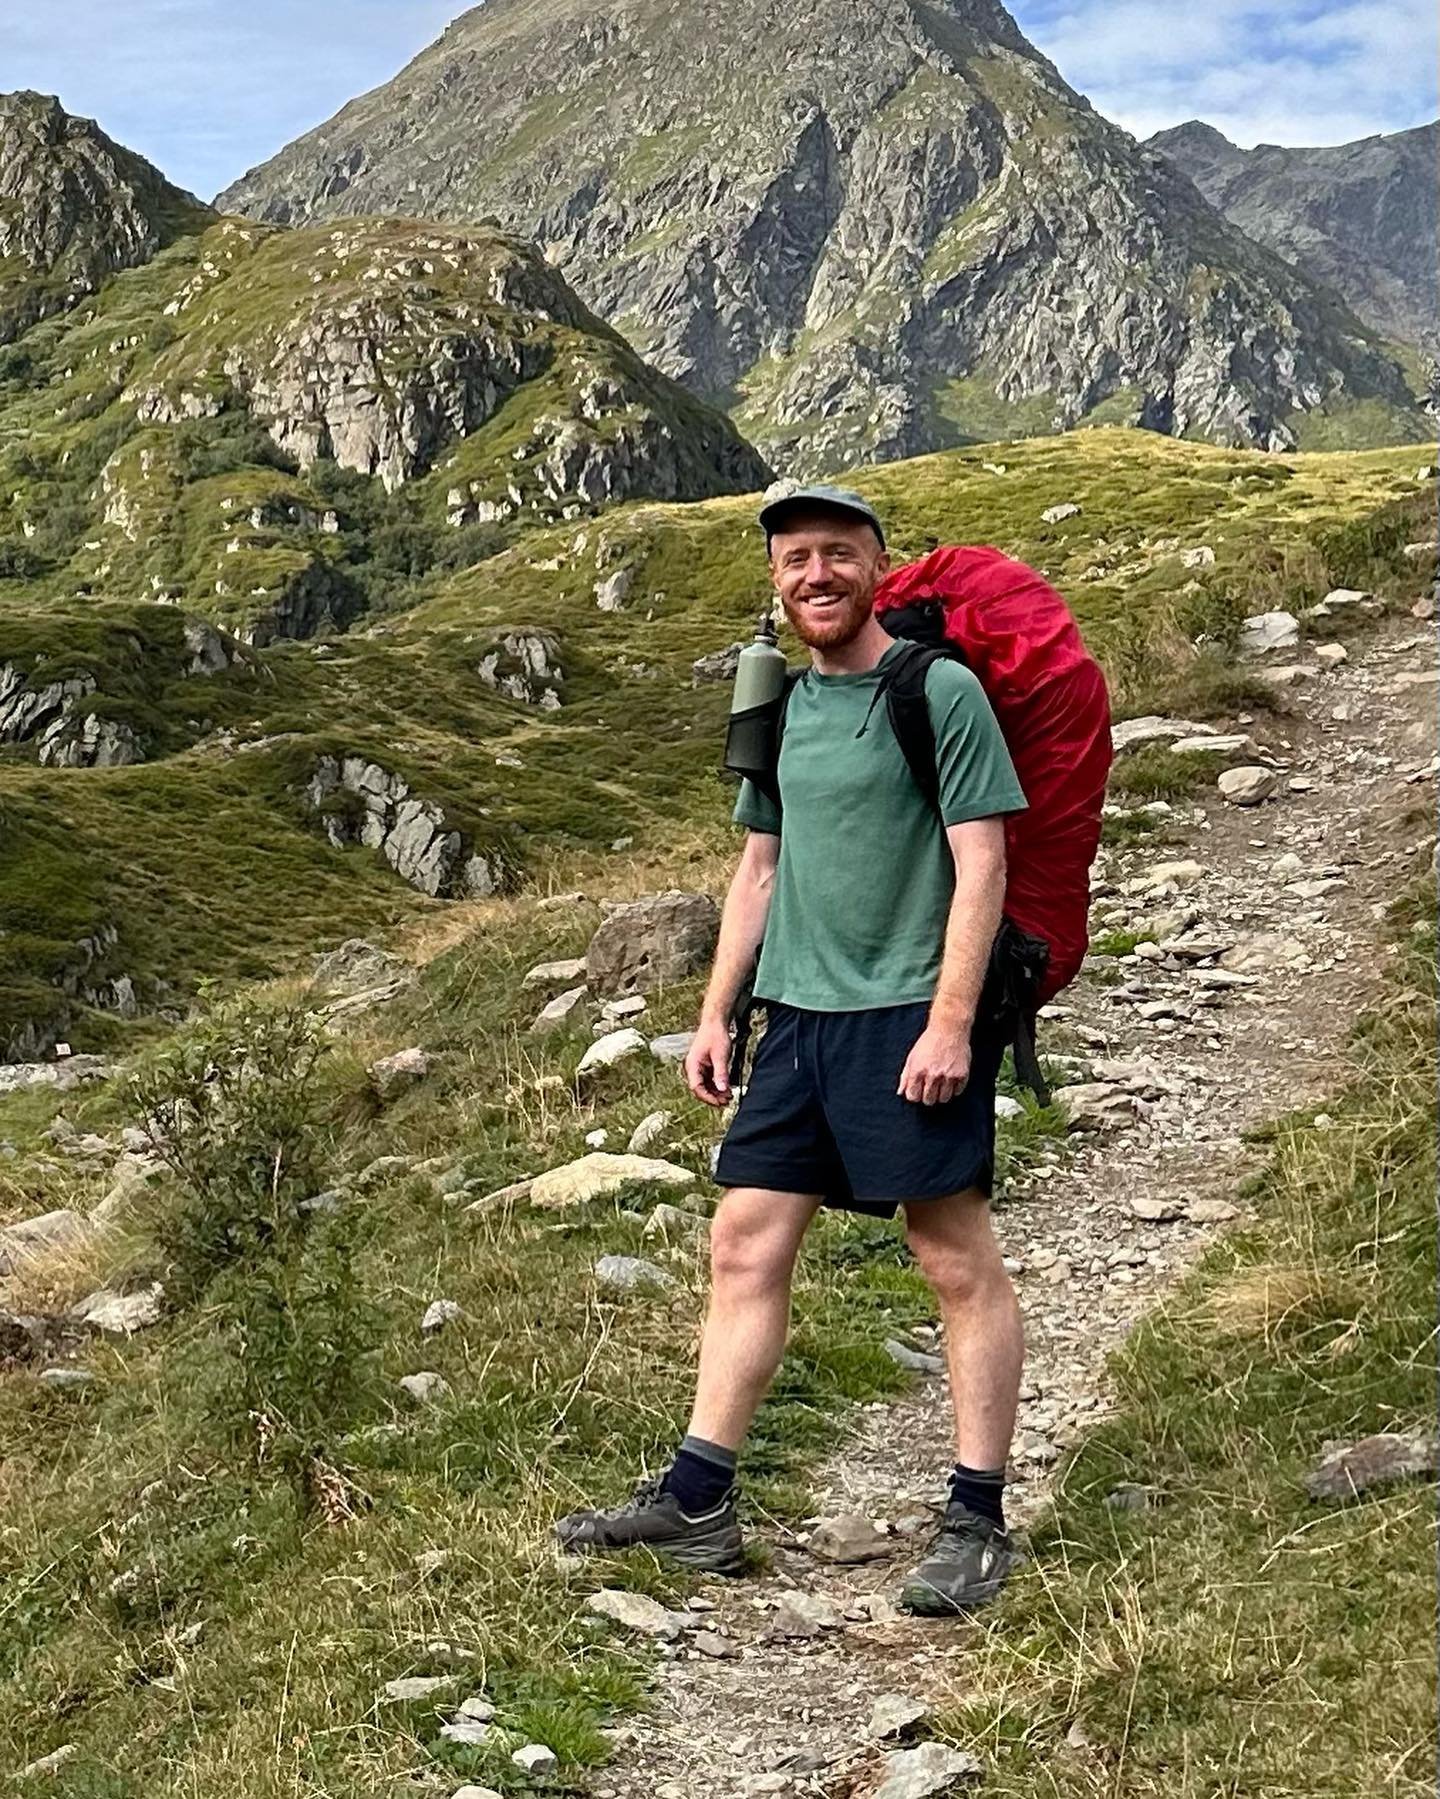 Me, acting the goat. 
1,960 km walked from home (London)  Across France, into Switzerland, around Lac L&eacute;man, over the Alps into and down into Italy. Back in October with a ginger tan and legs to die for. Next stop down the coast from Massa  an